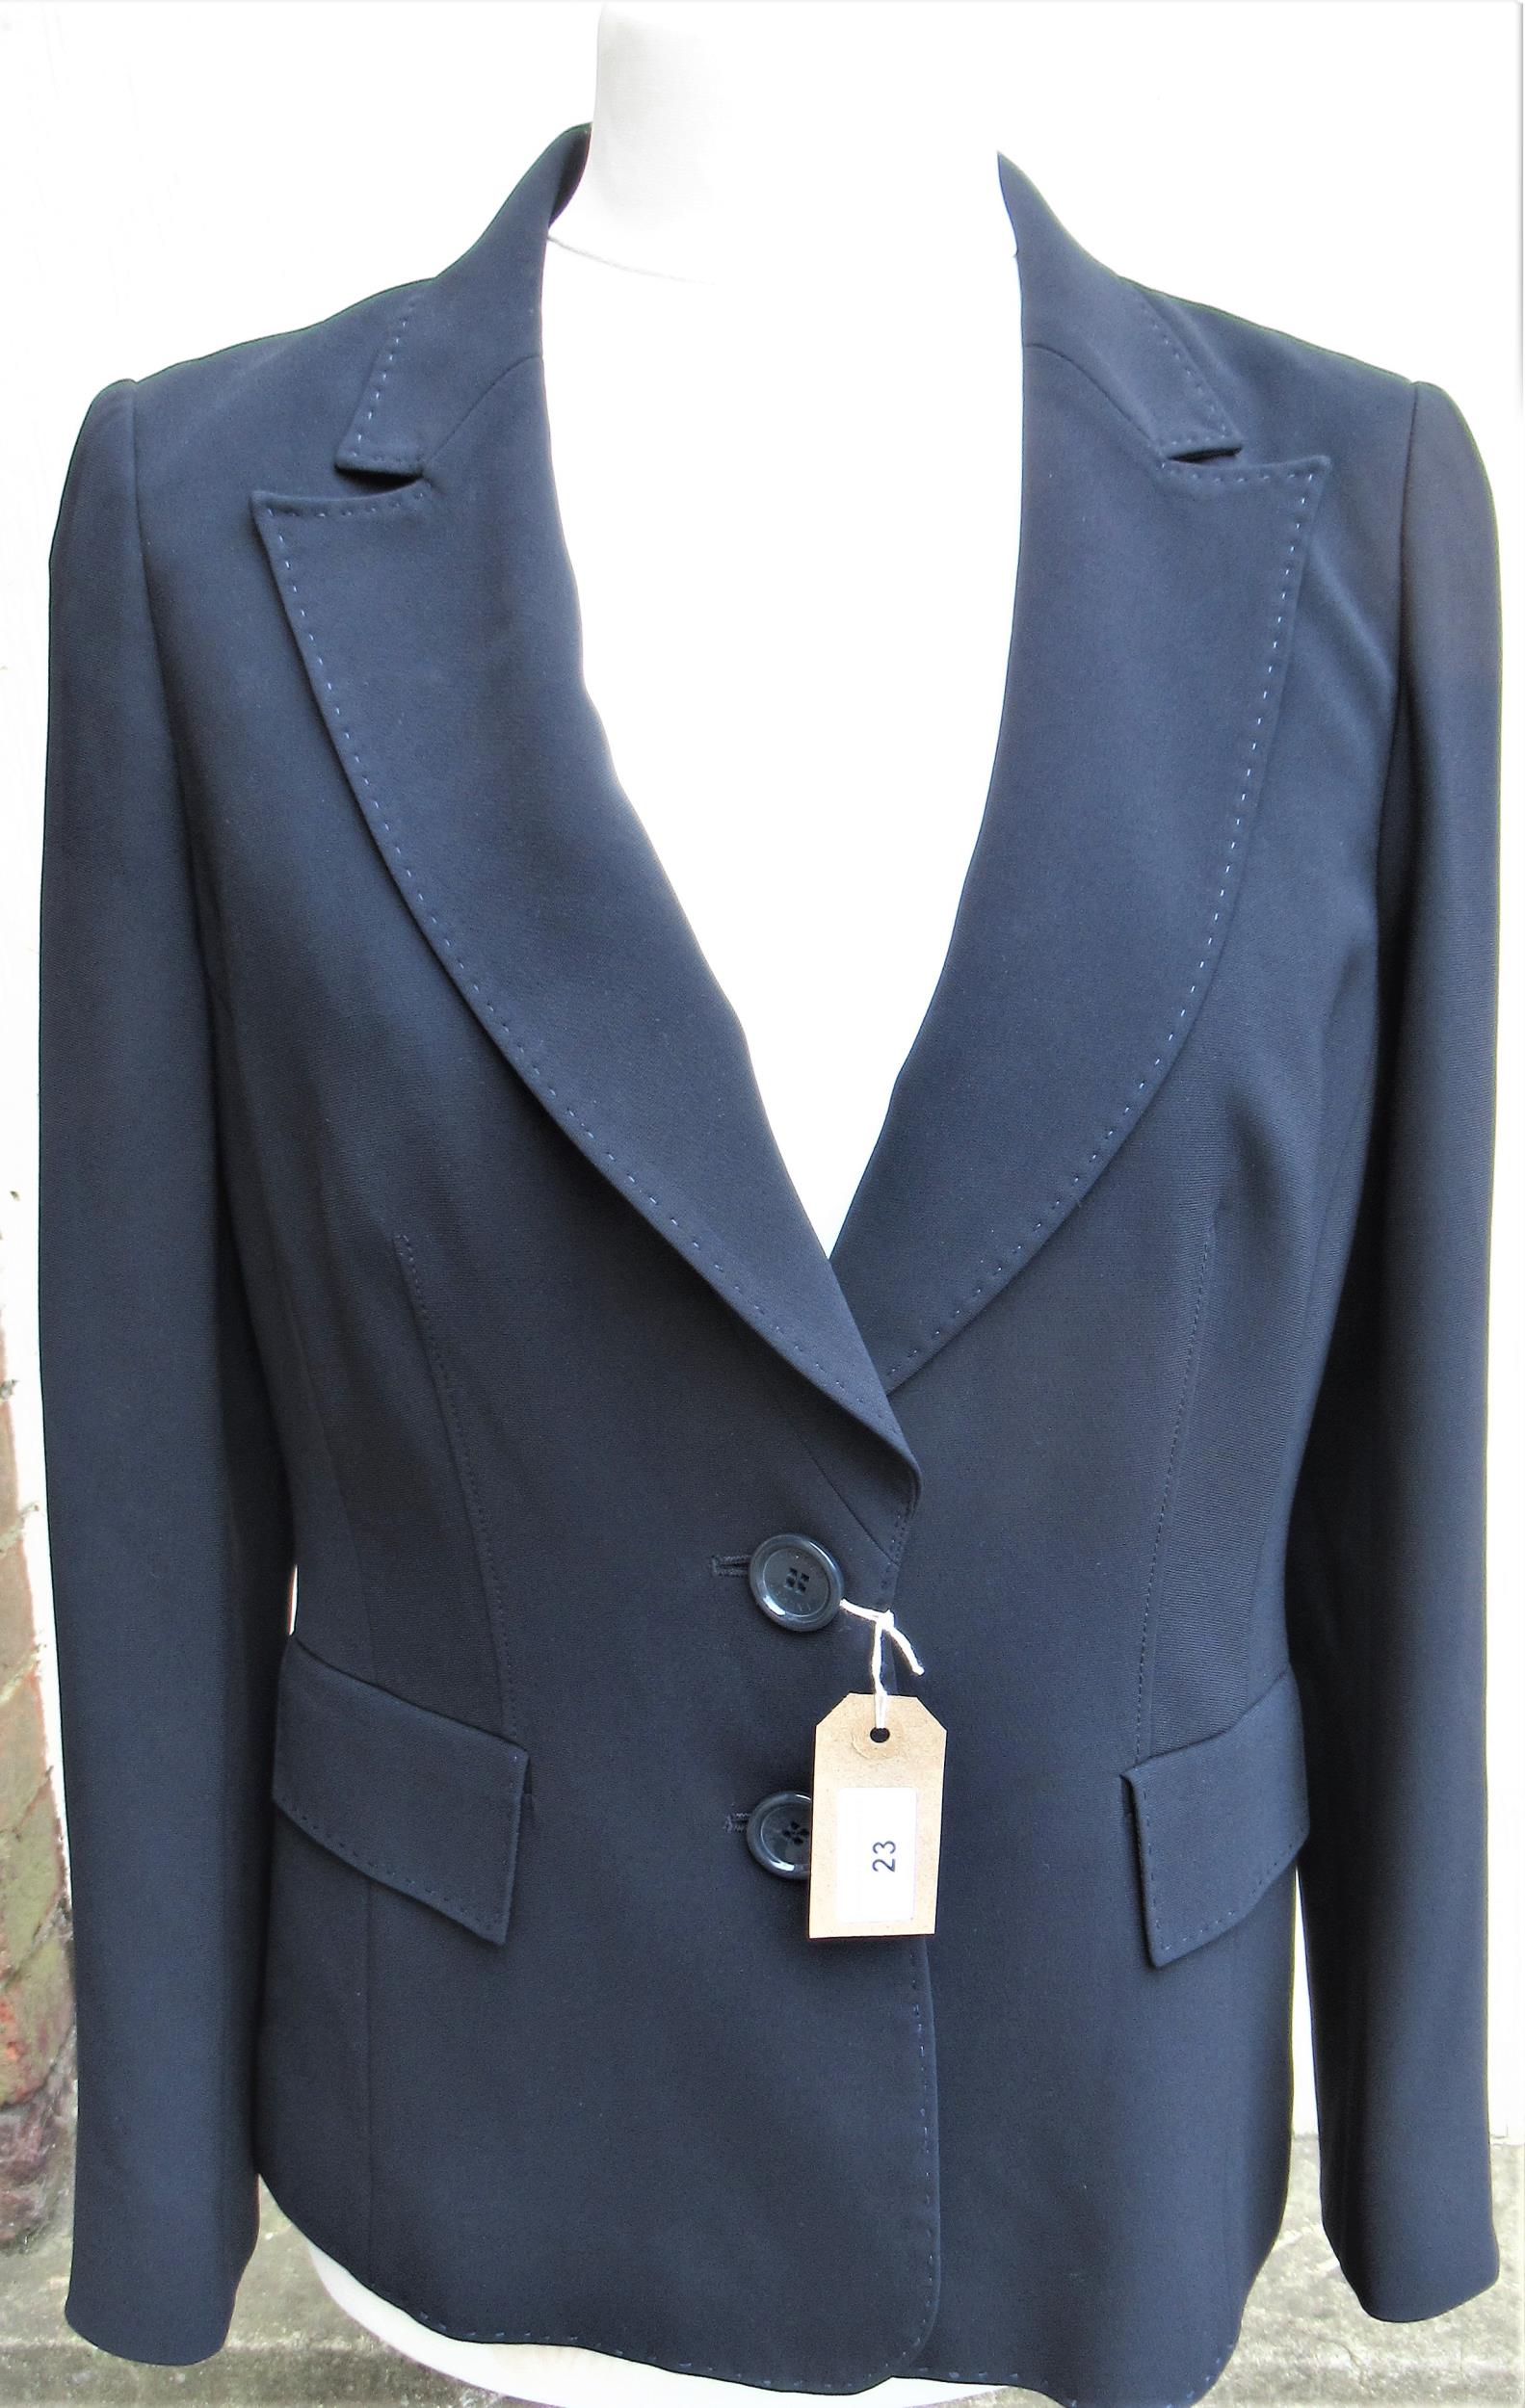 Jaeger navy blue ladies jacket, Jaeger blue patterned matching skirt and blouse and a Jaeger black